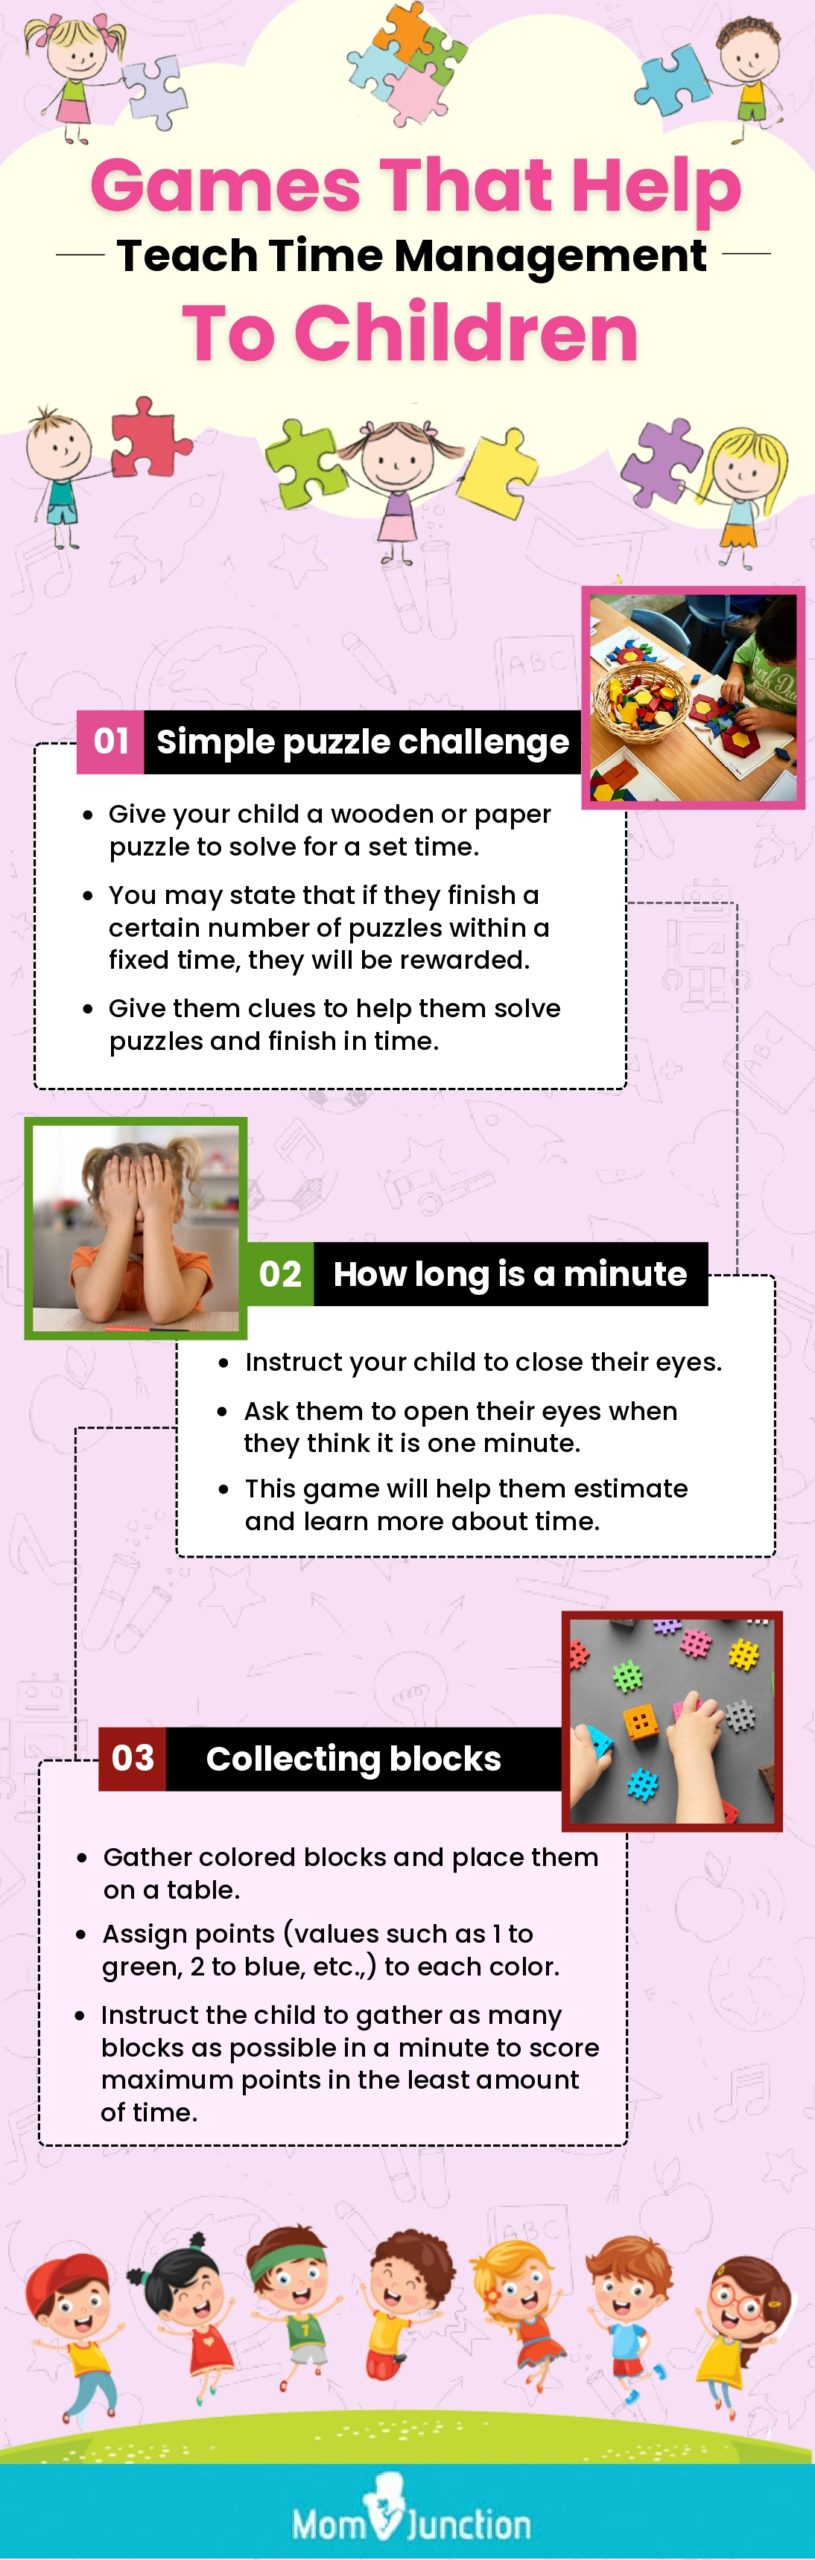 games that help learn time management for children (infographic)